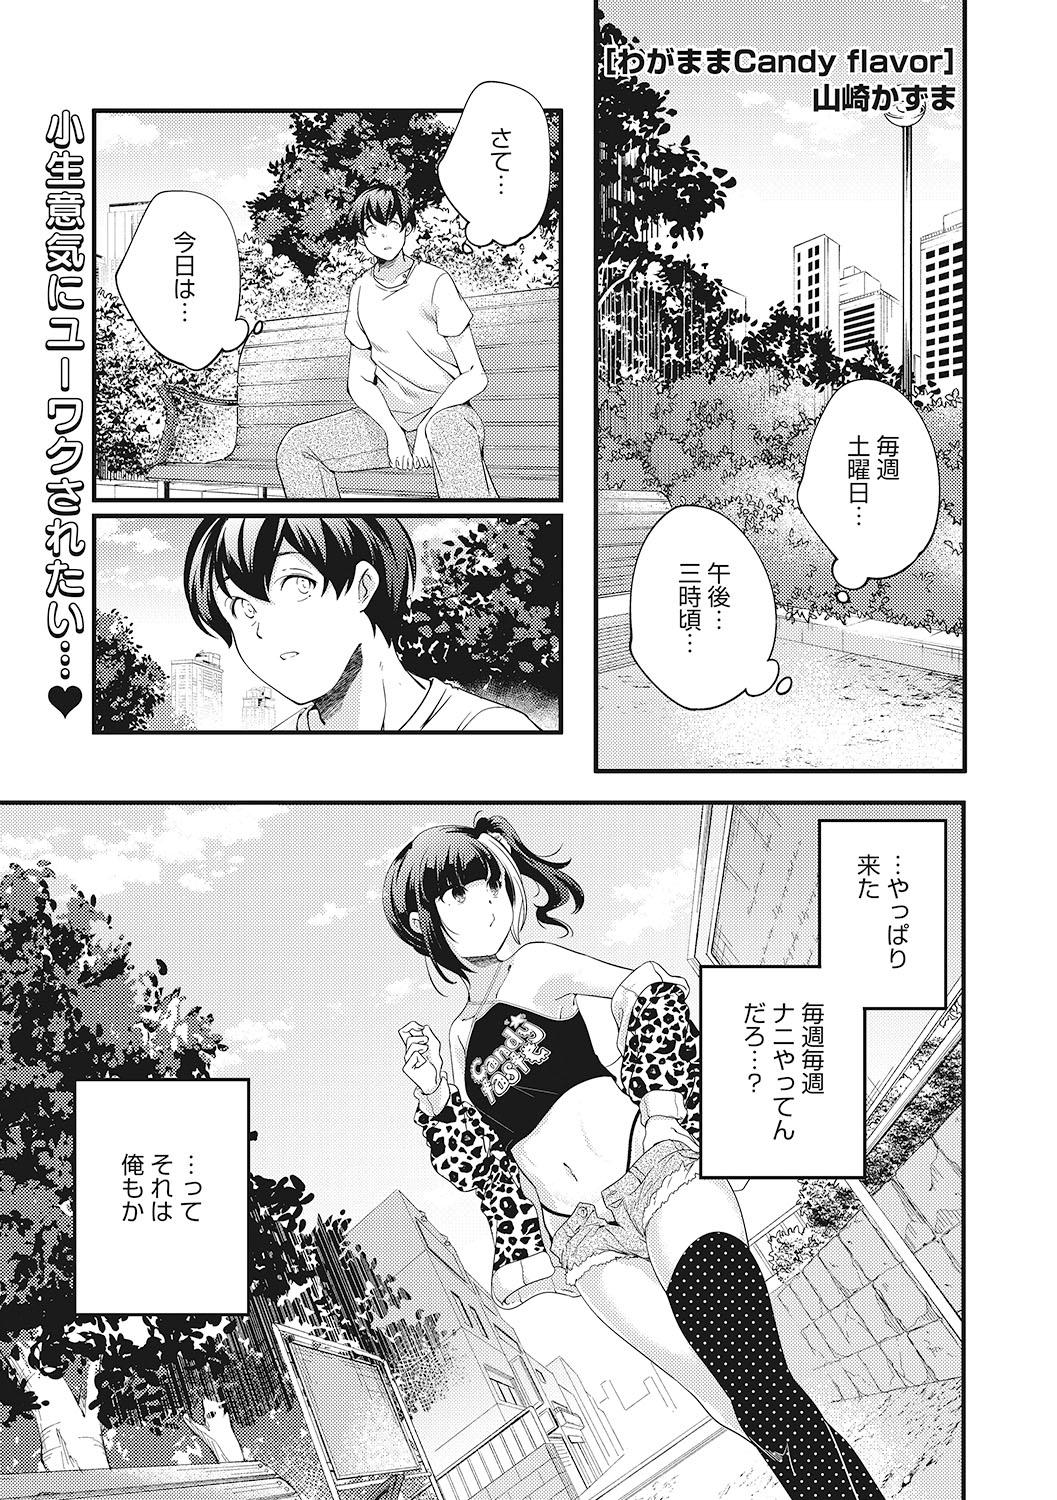 Perfect Body [Anthology] LQ -Little Queen- Vol. 43 [Digital] Caseiro - Page 6